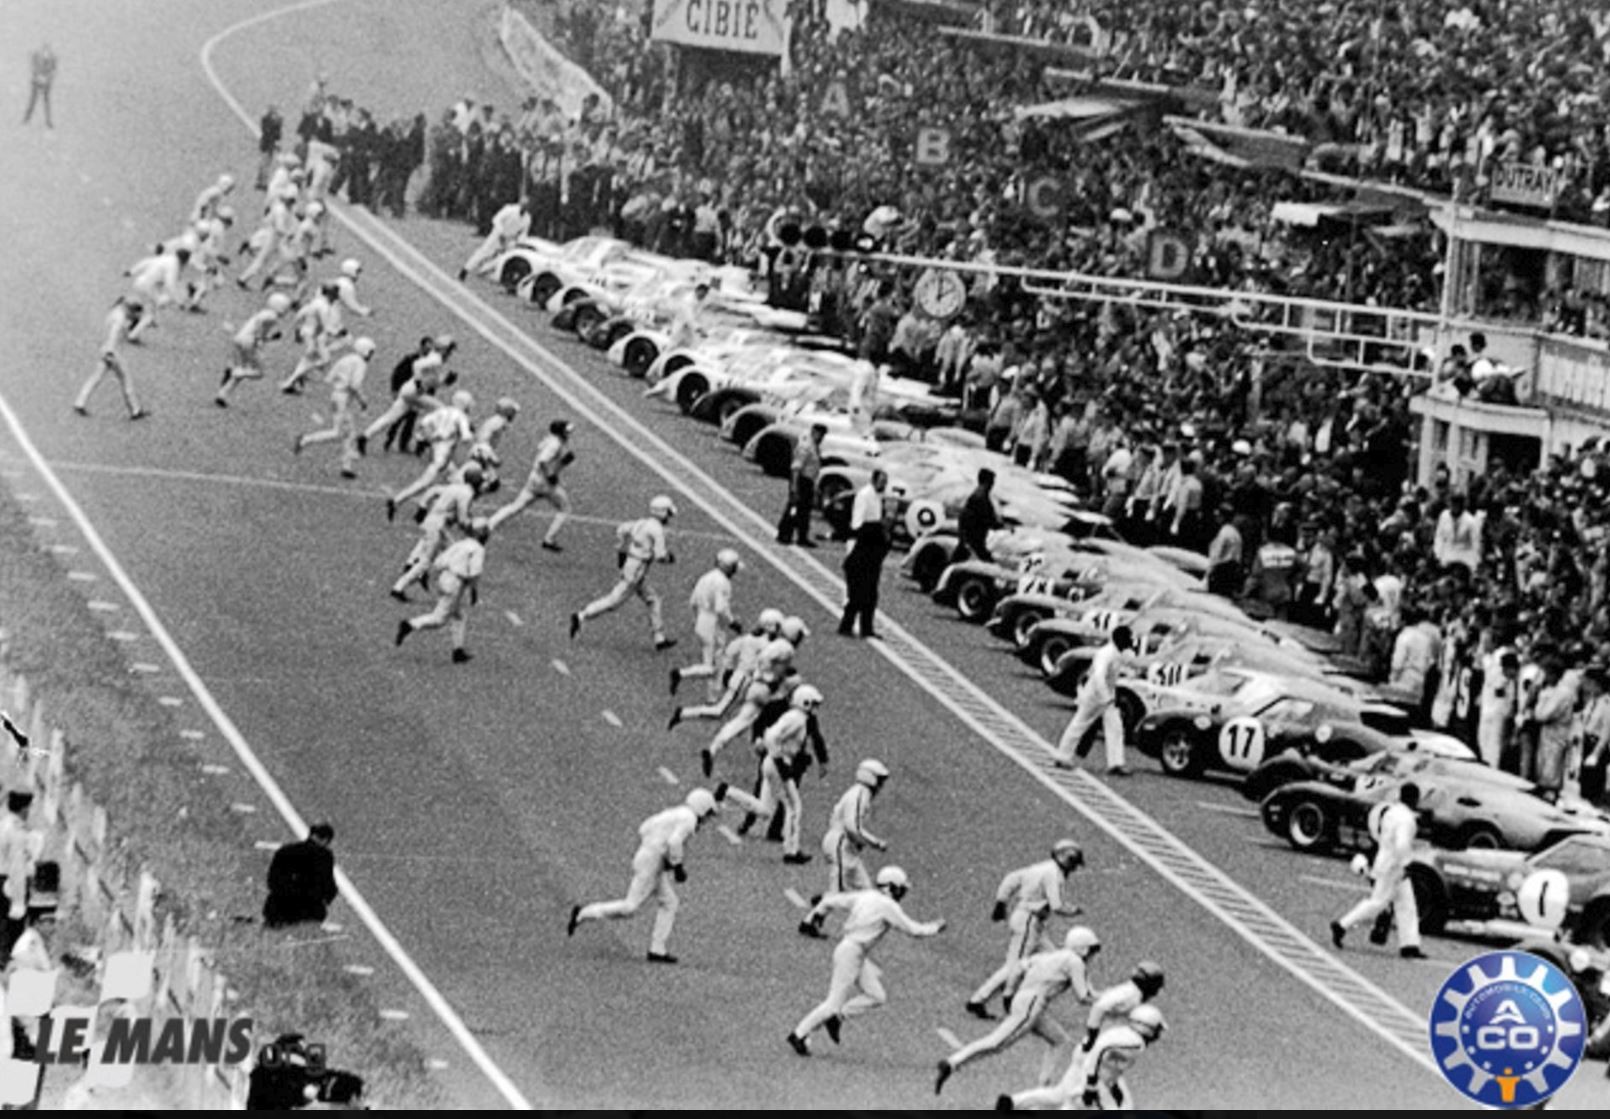 The start of a race at Le Mans.